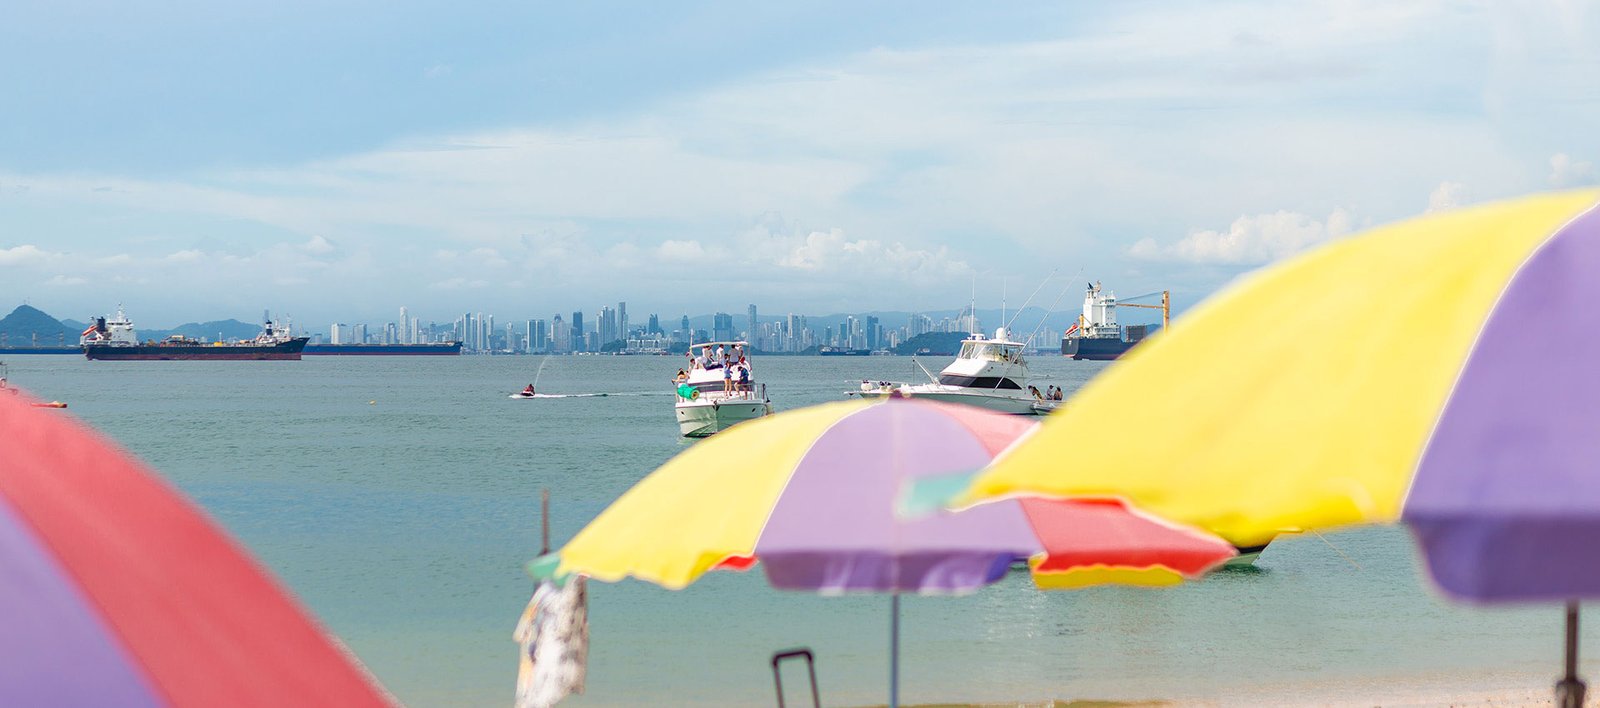 Panama: A Day At The Beach